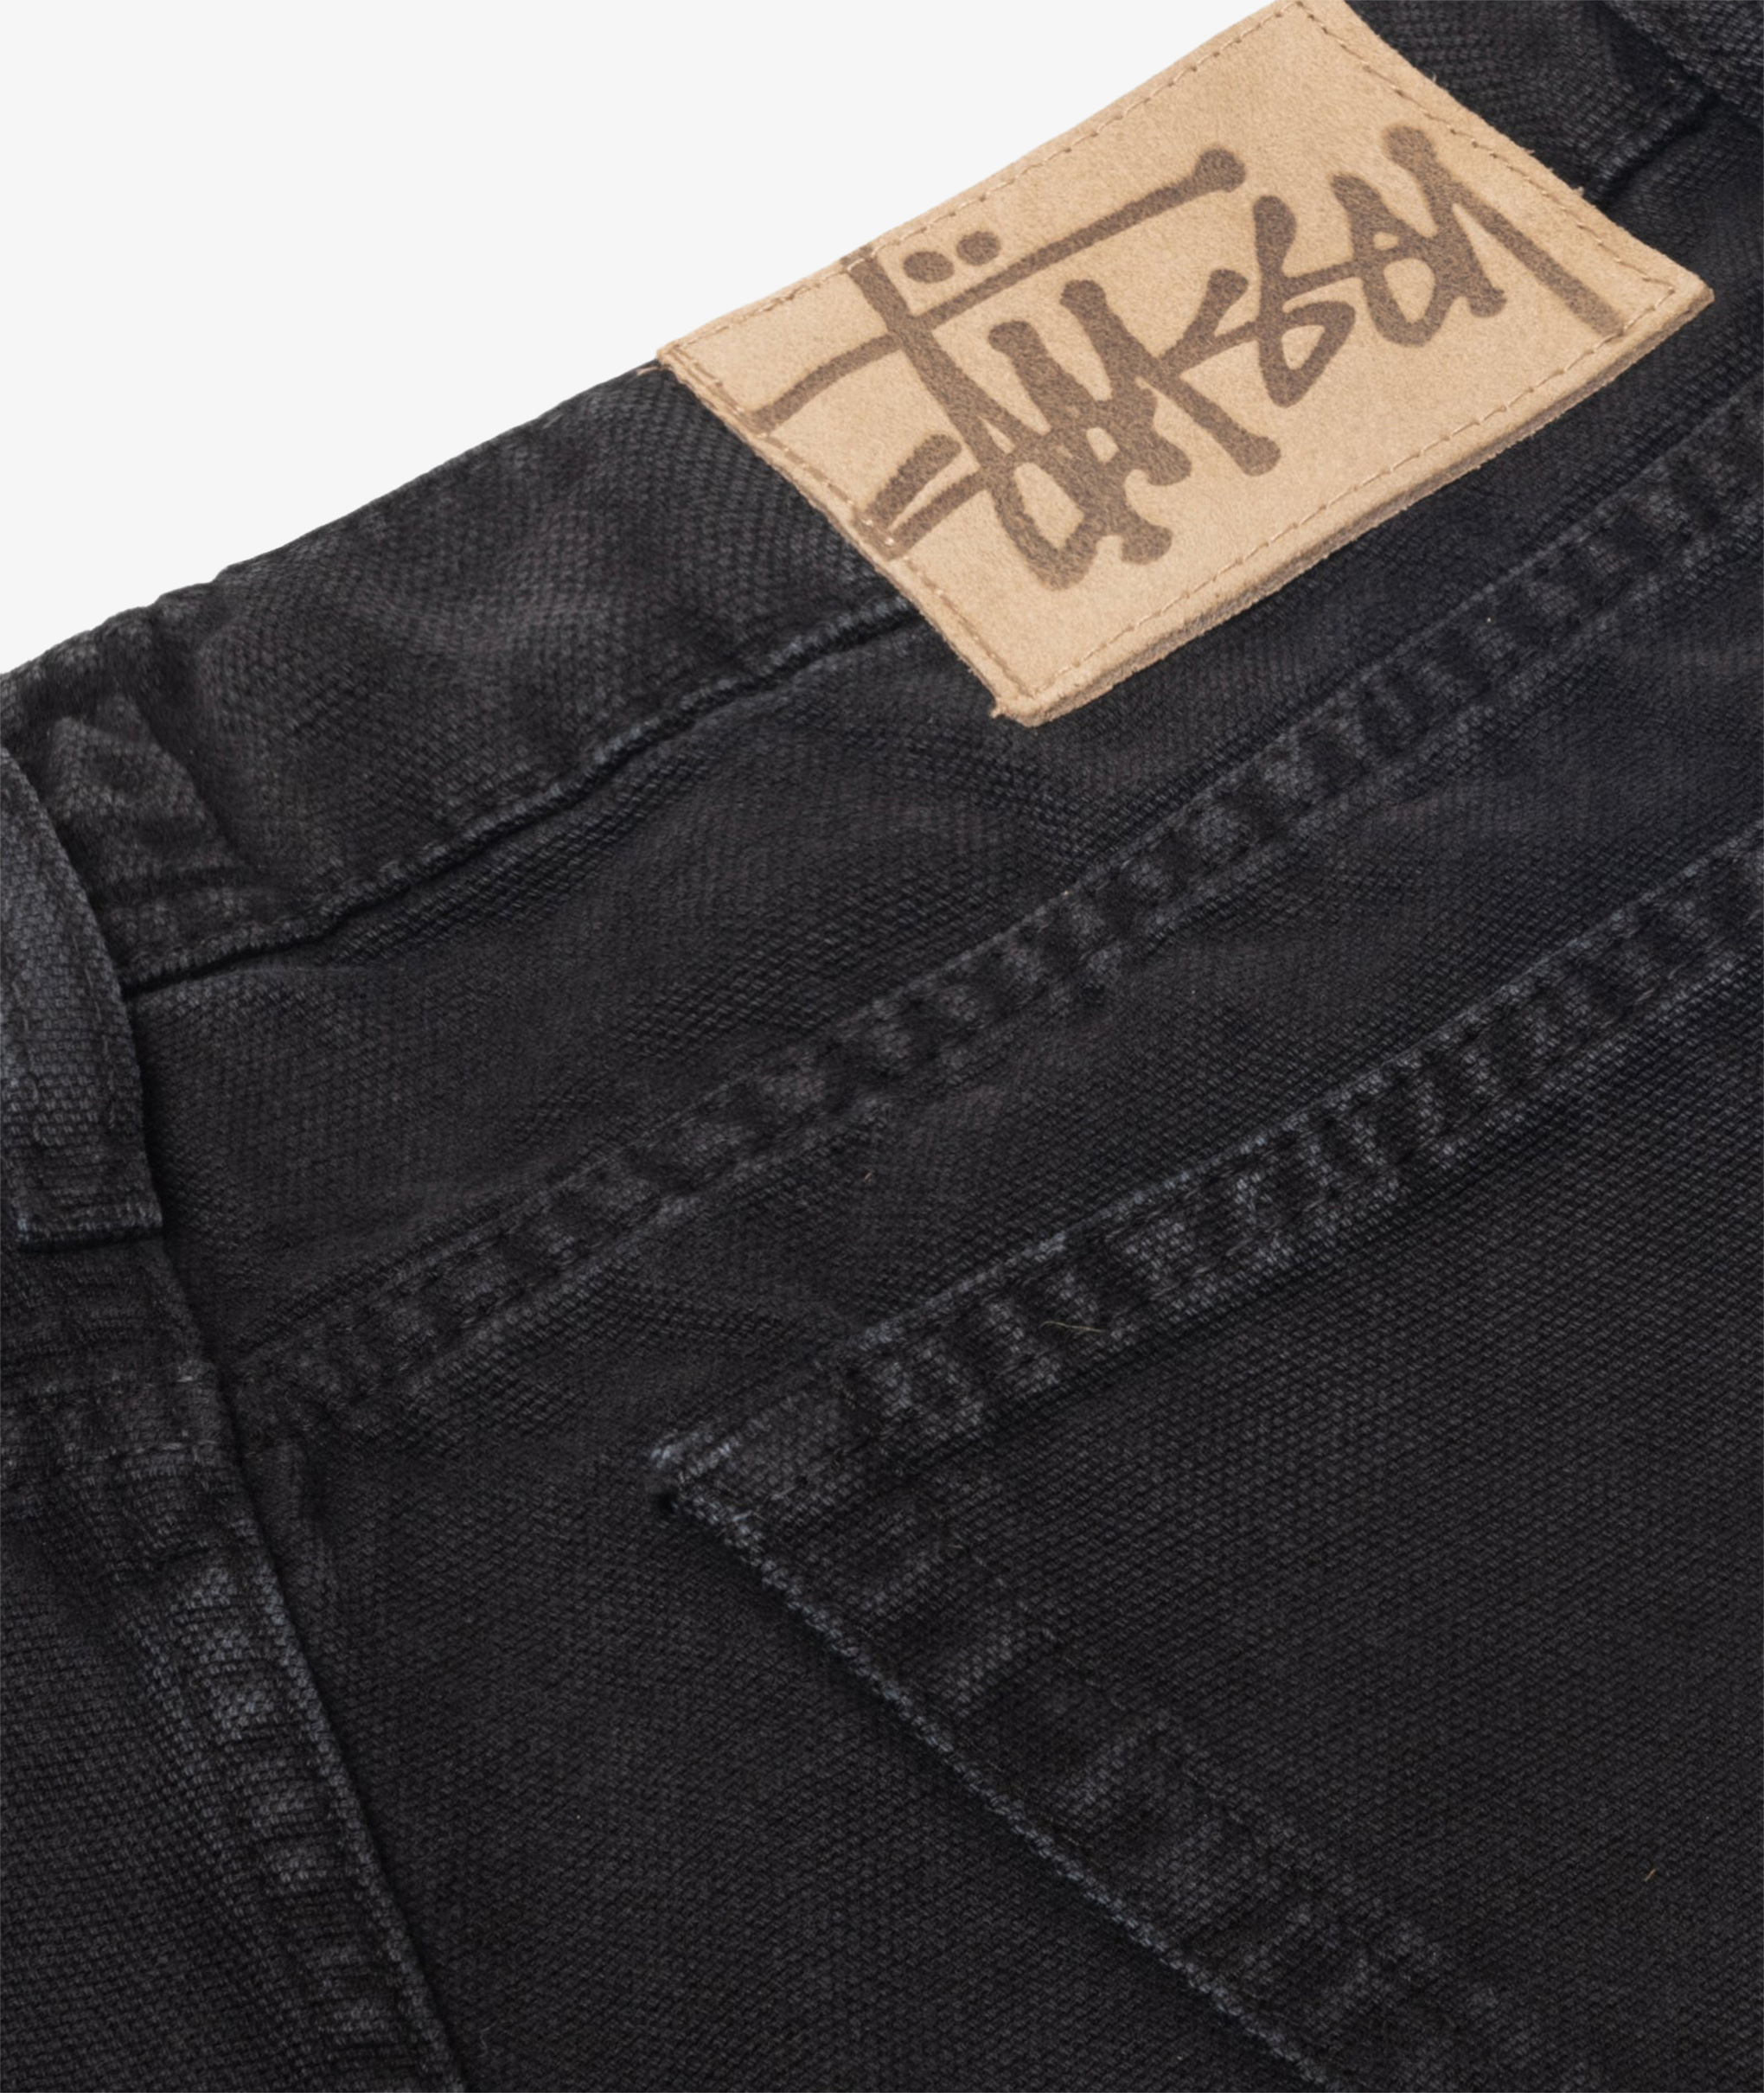 Norse Store | Shipping Worldwide - Stüssy Washed Canvas Big